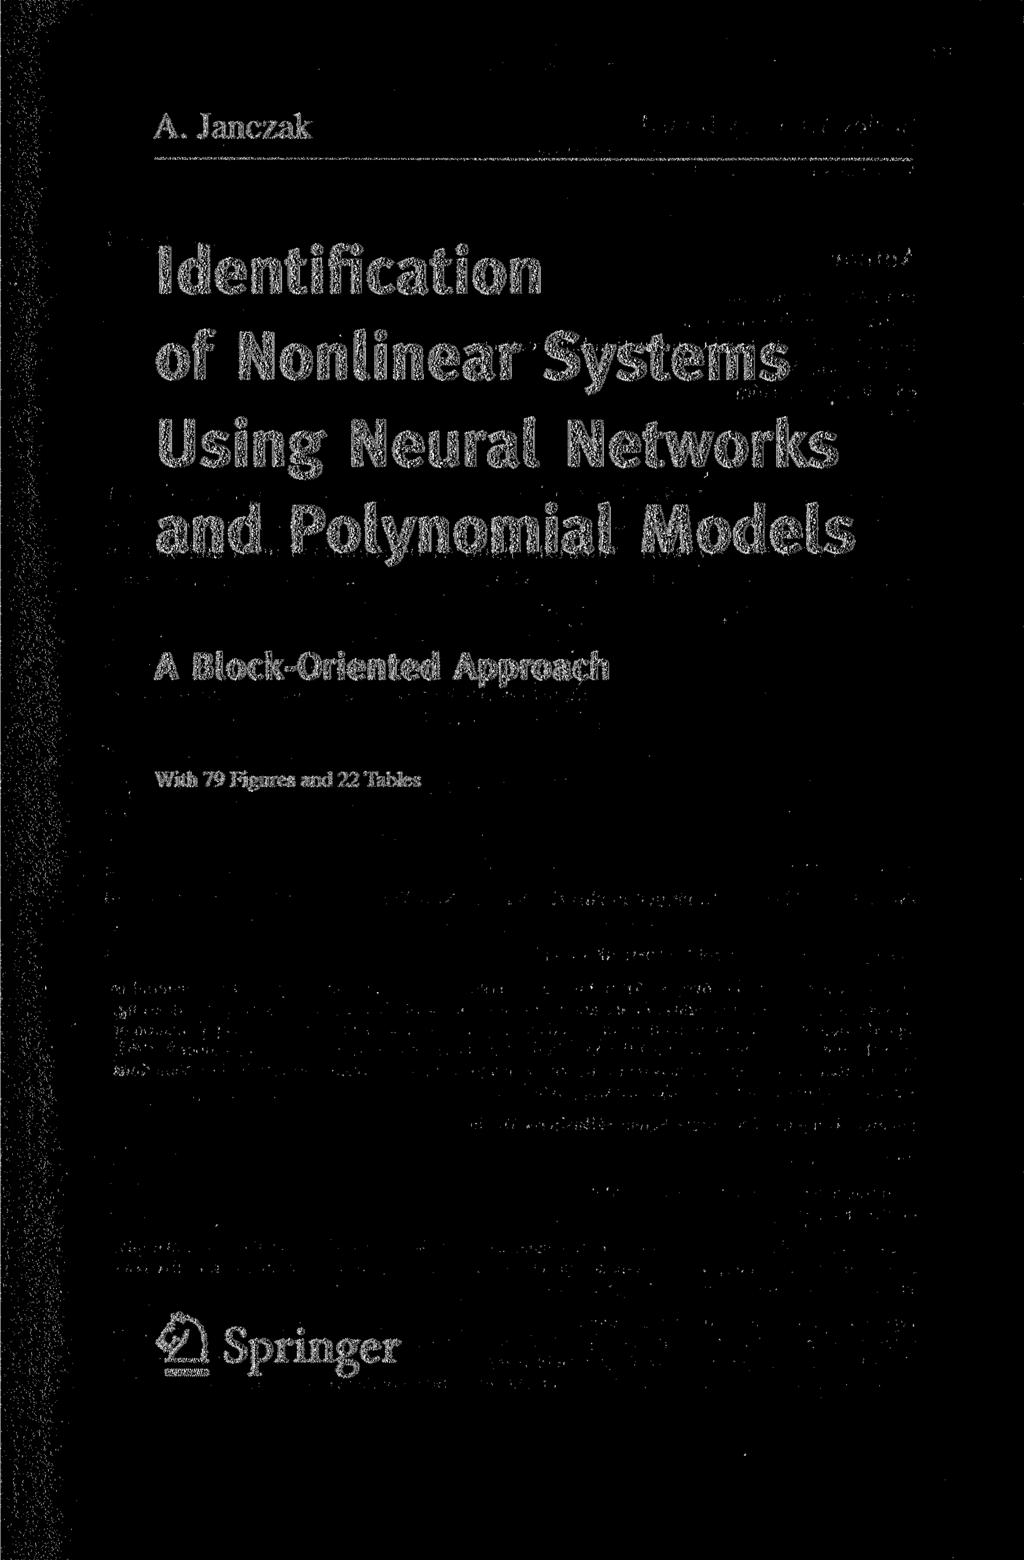 A.Janczak Identification of Nonlinear Systems Using Neural Networks and